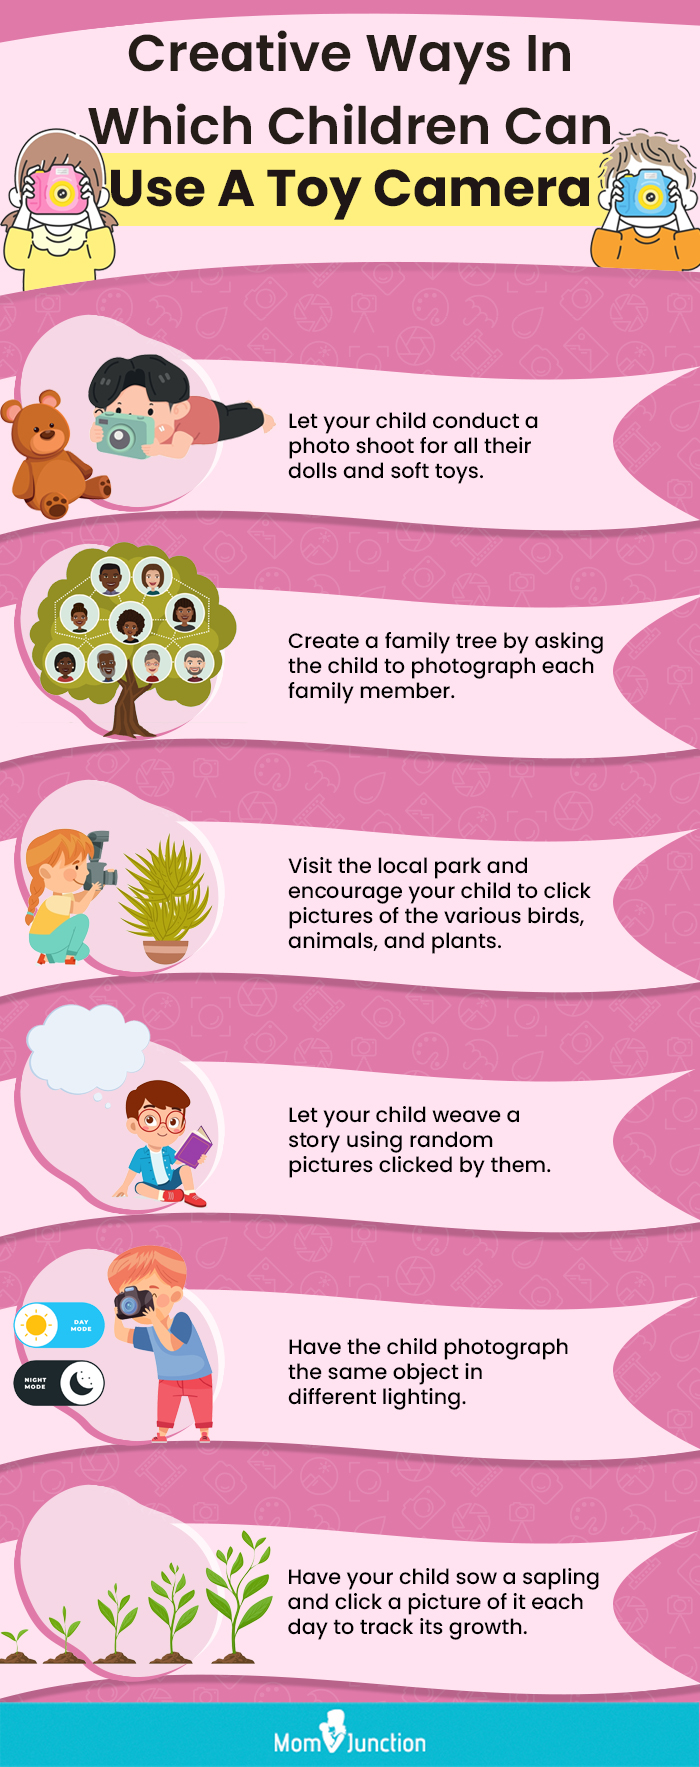 Creative Ways In Which Children Can Use A Toy Camera (infographic)